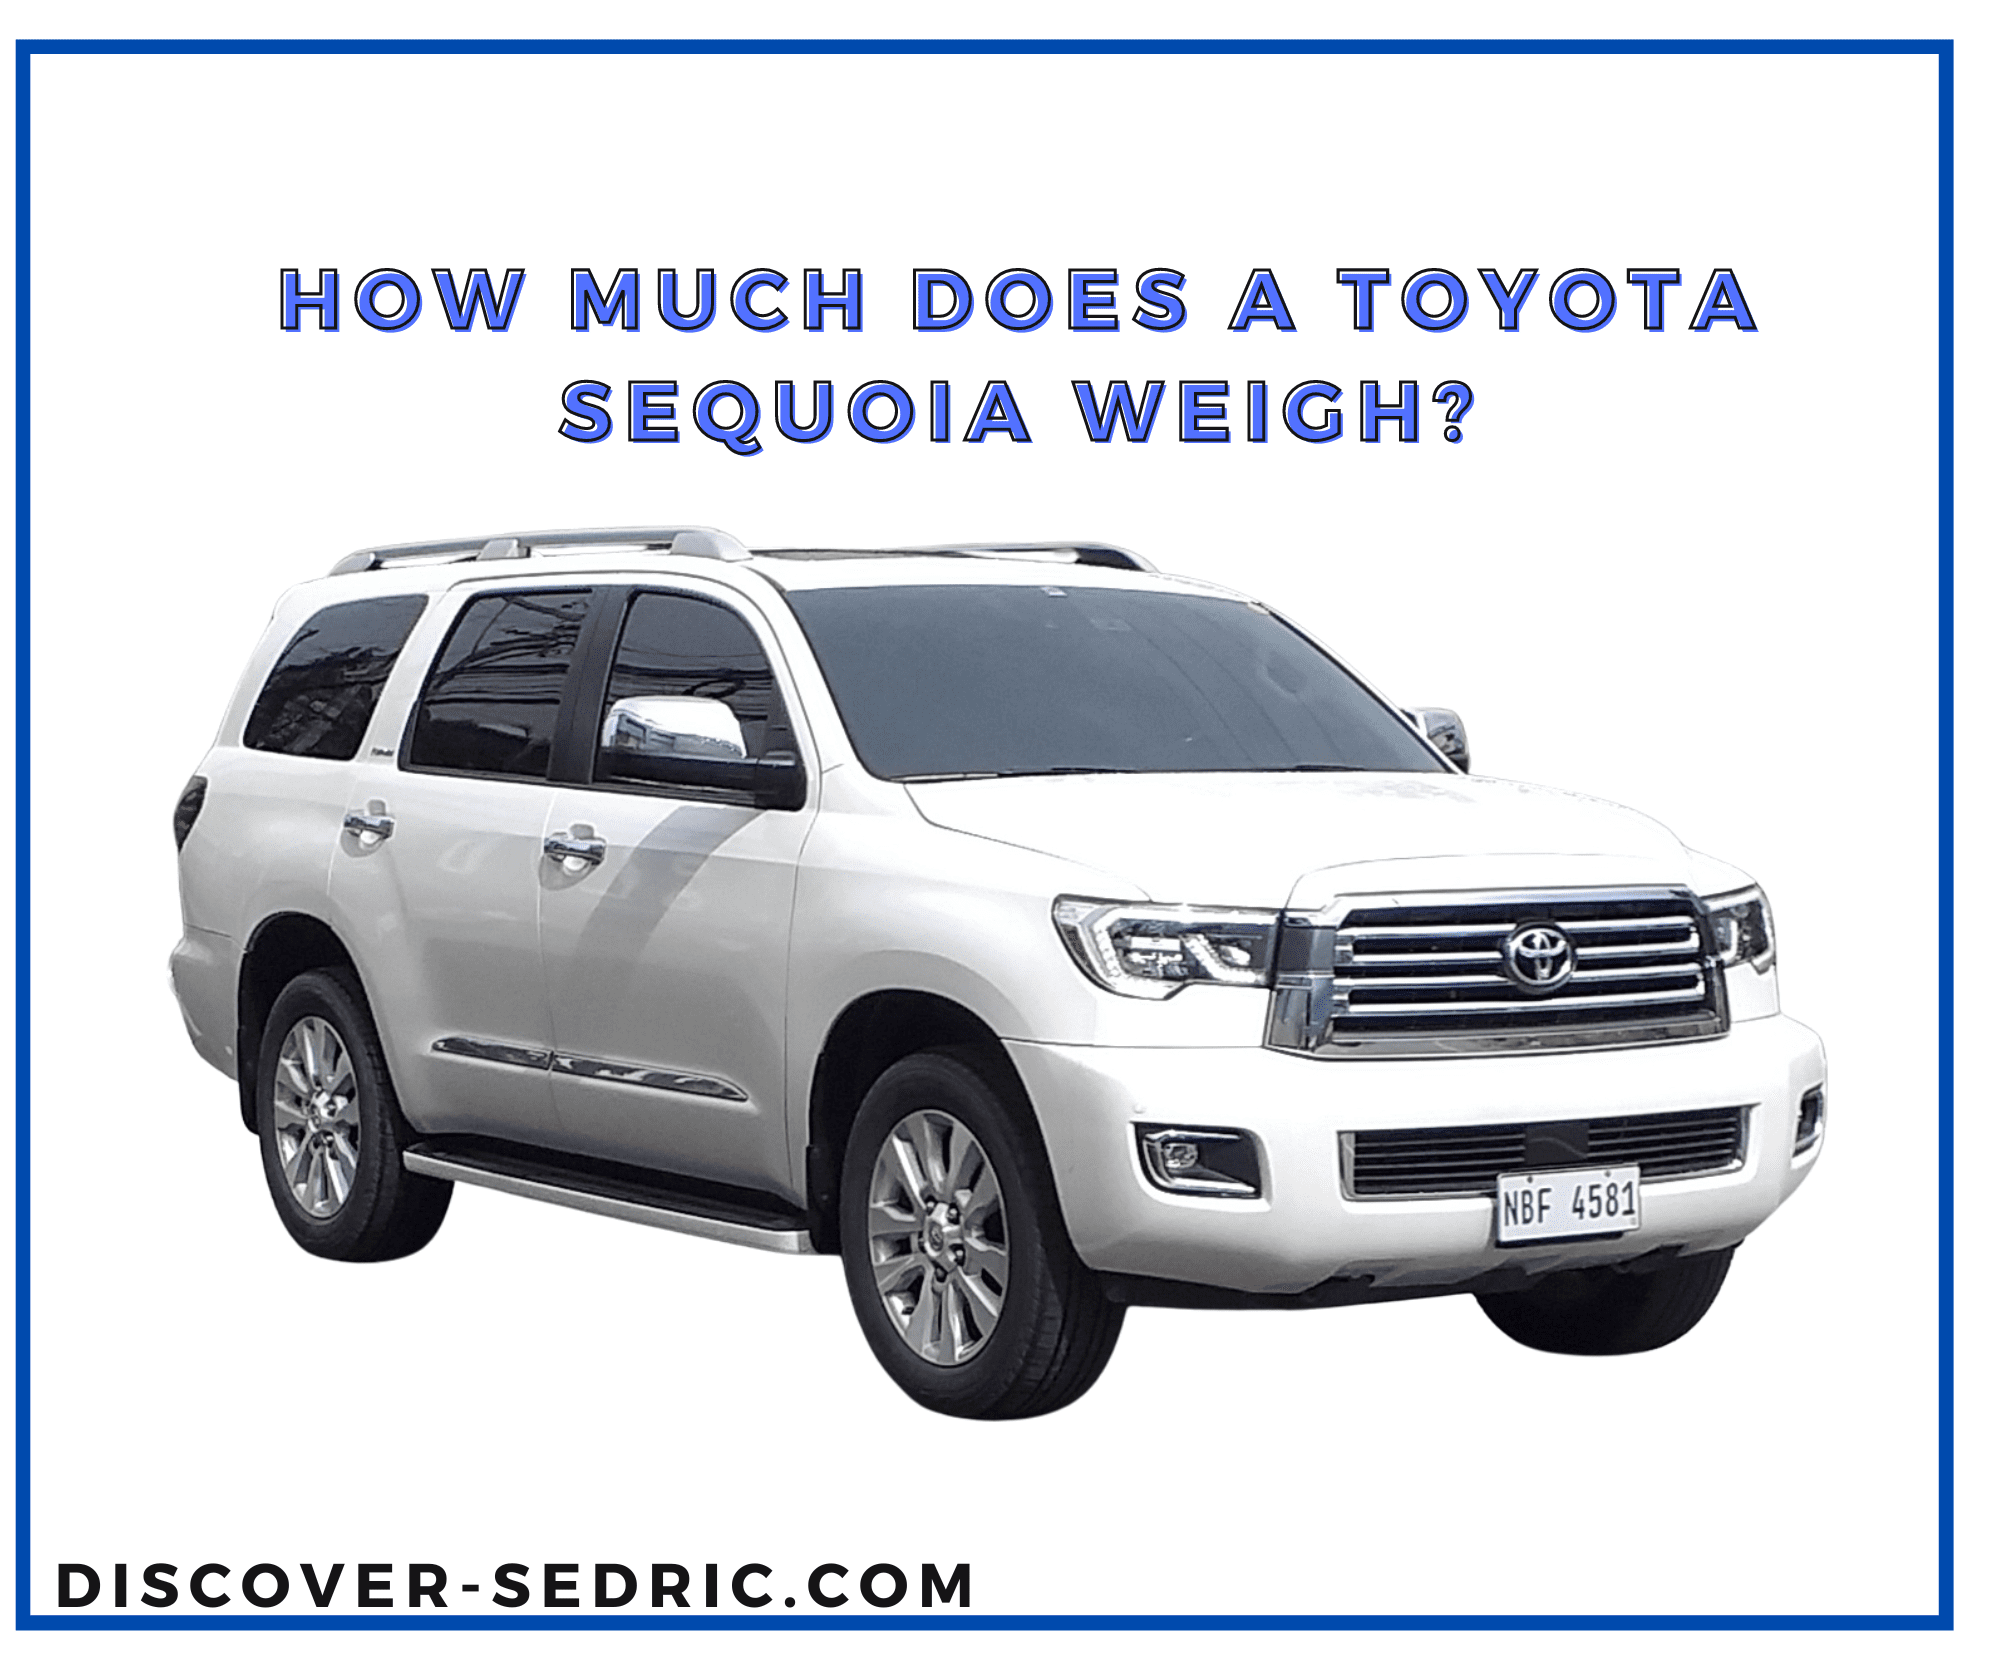 How Much Does A Toyota Sequoia Weigh? [Answered]